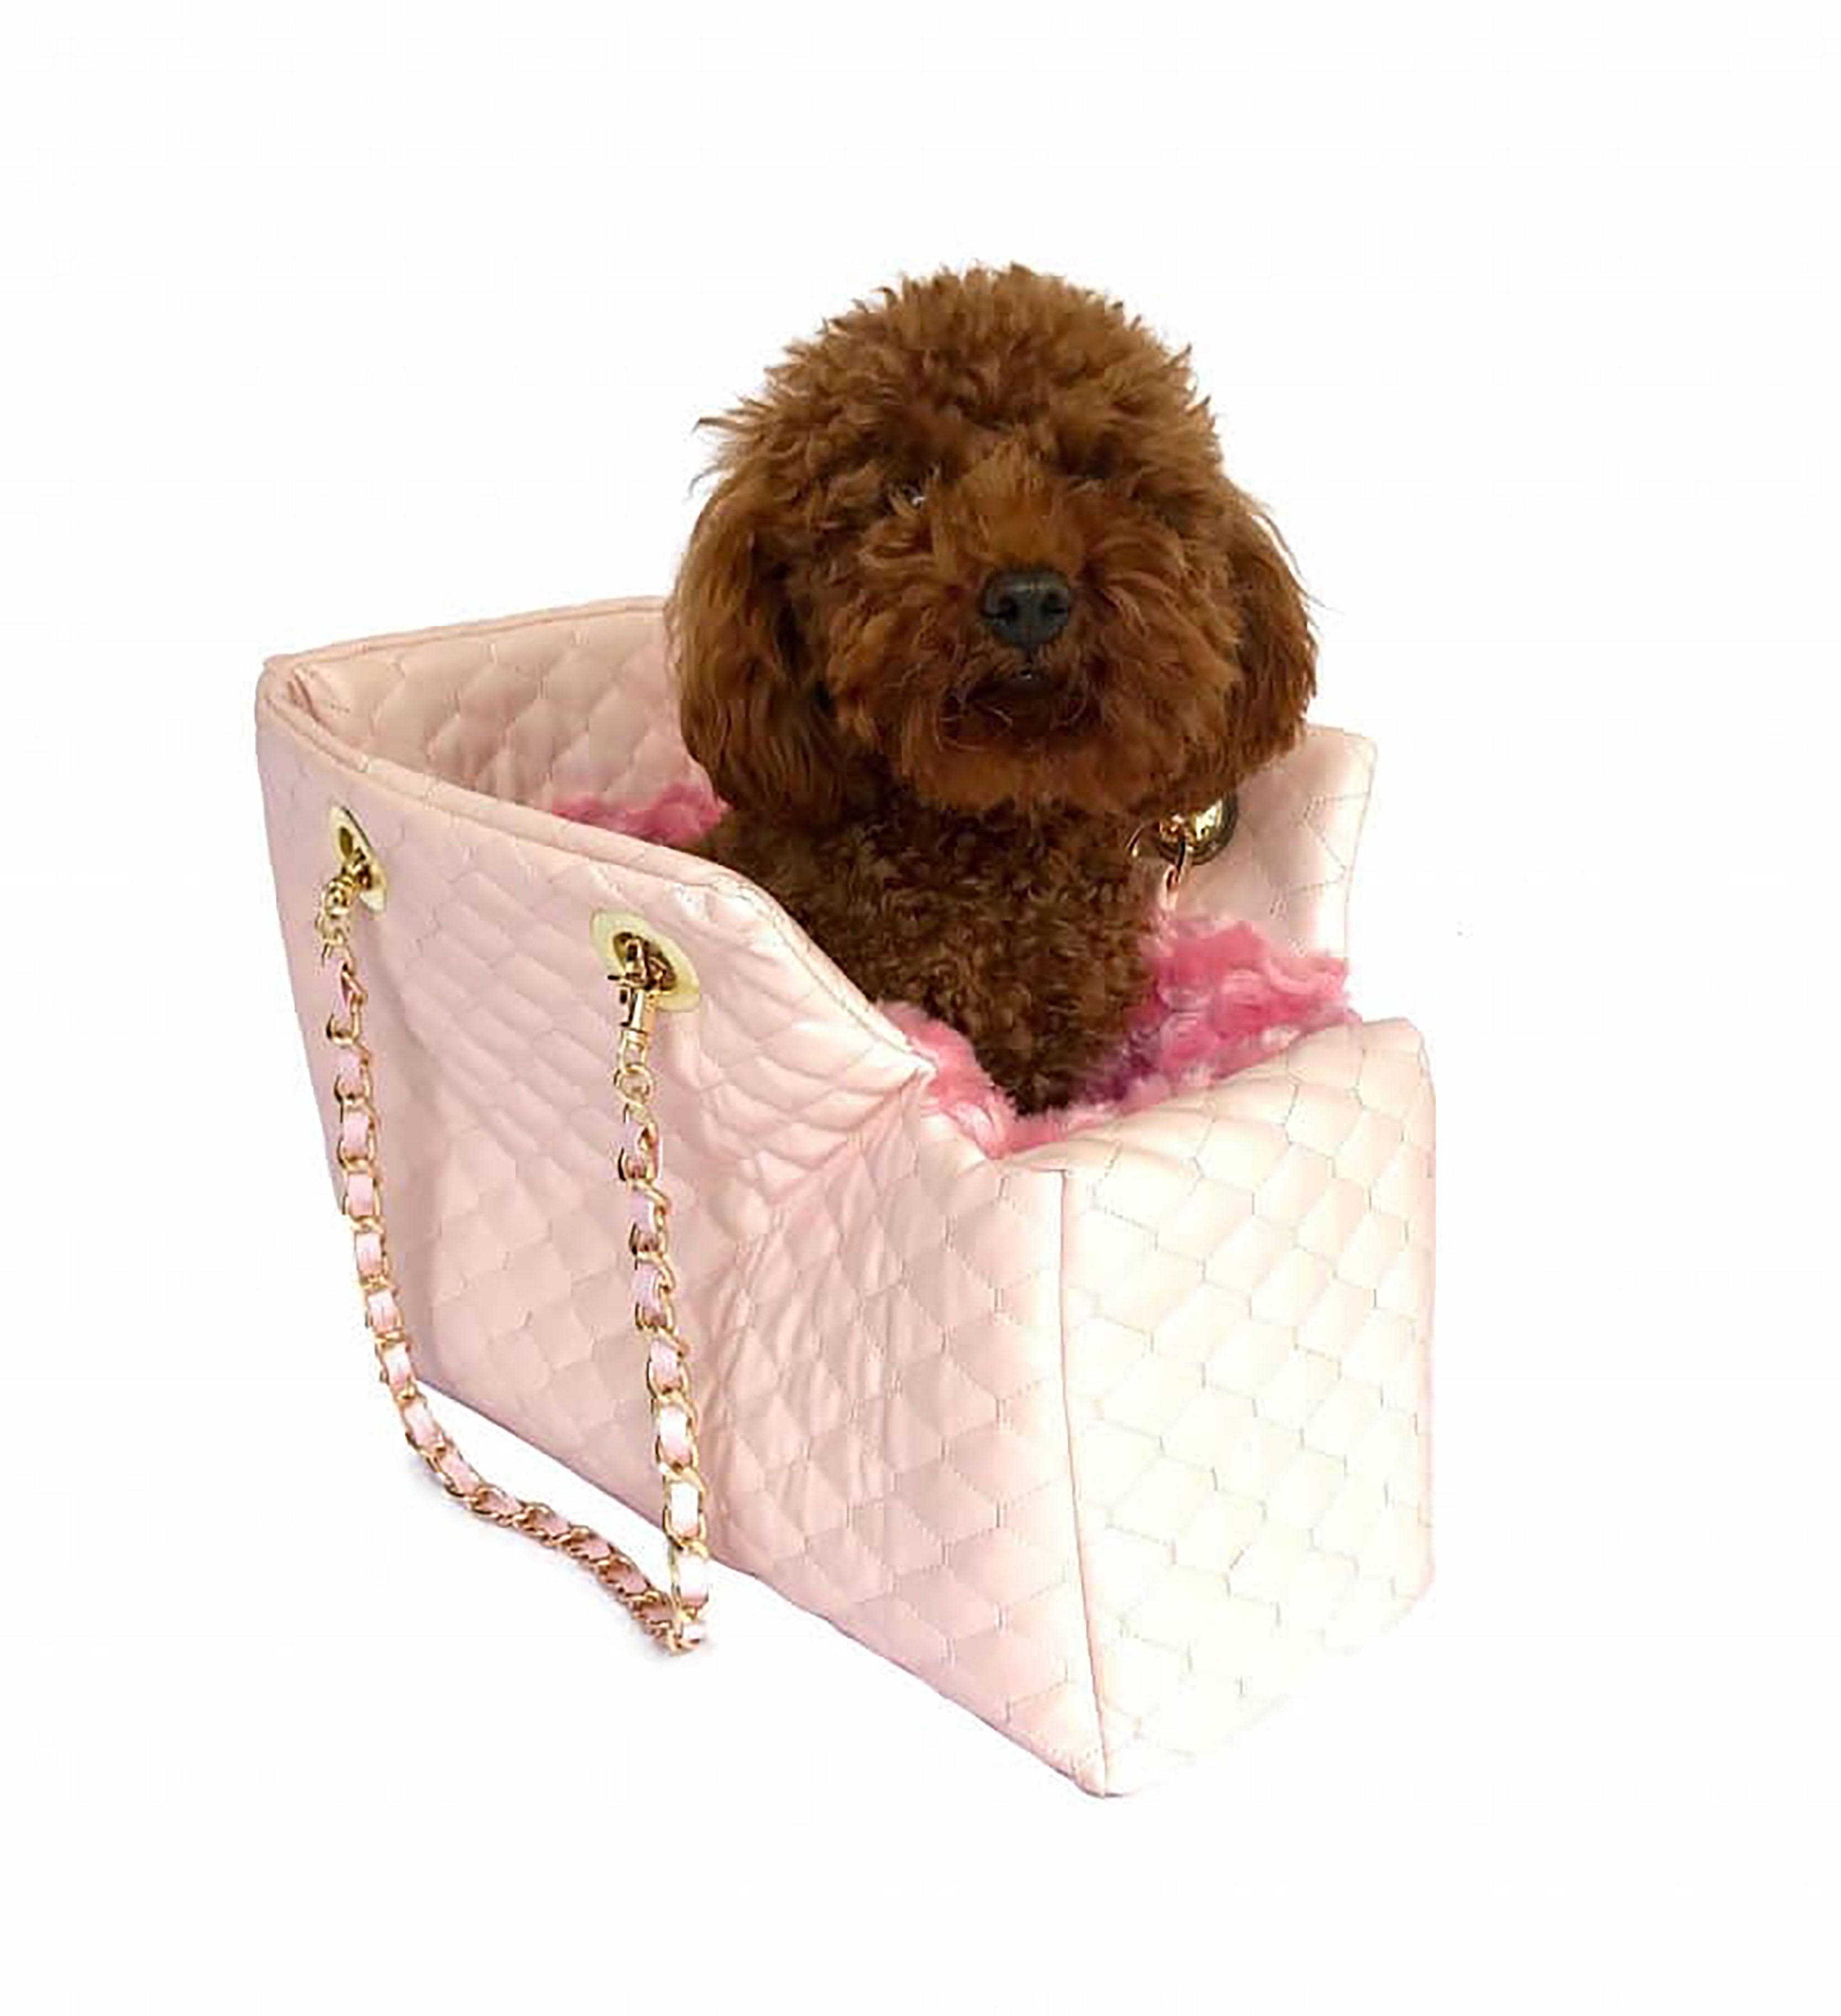 Porsha Dog Carrier  Shop Luxury Dog Carriers – TeaCups, Puppies